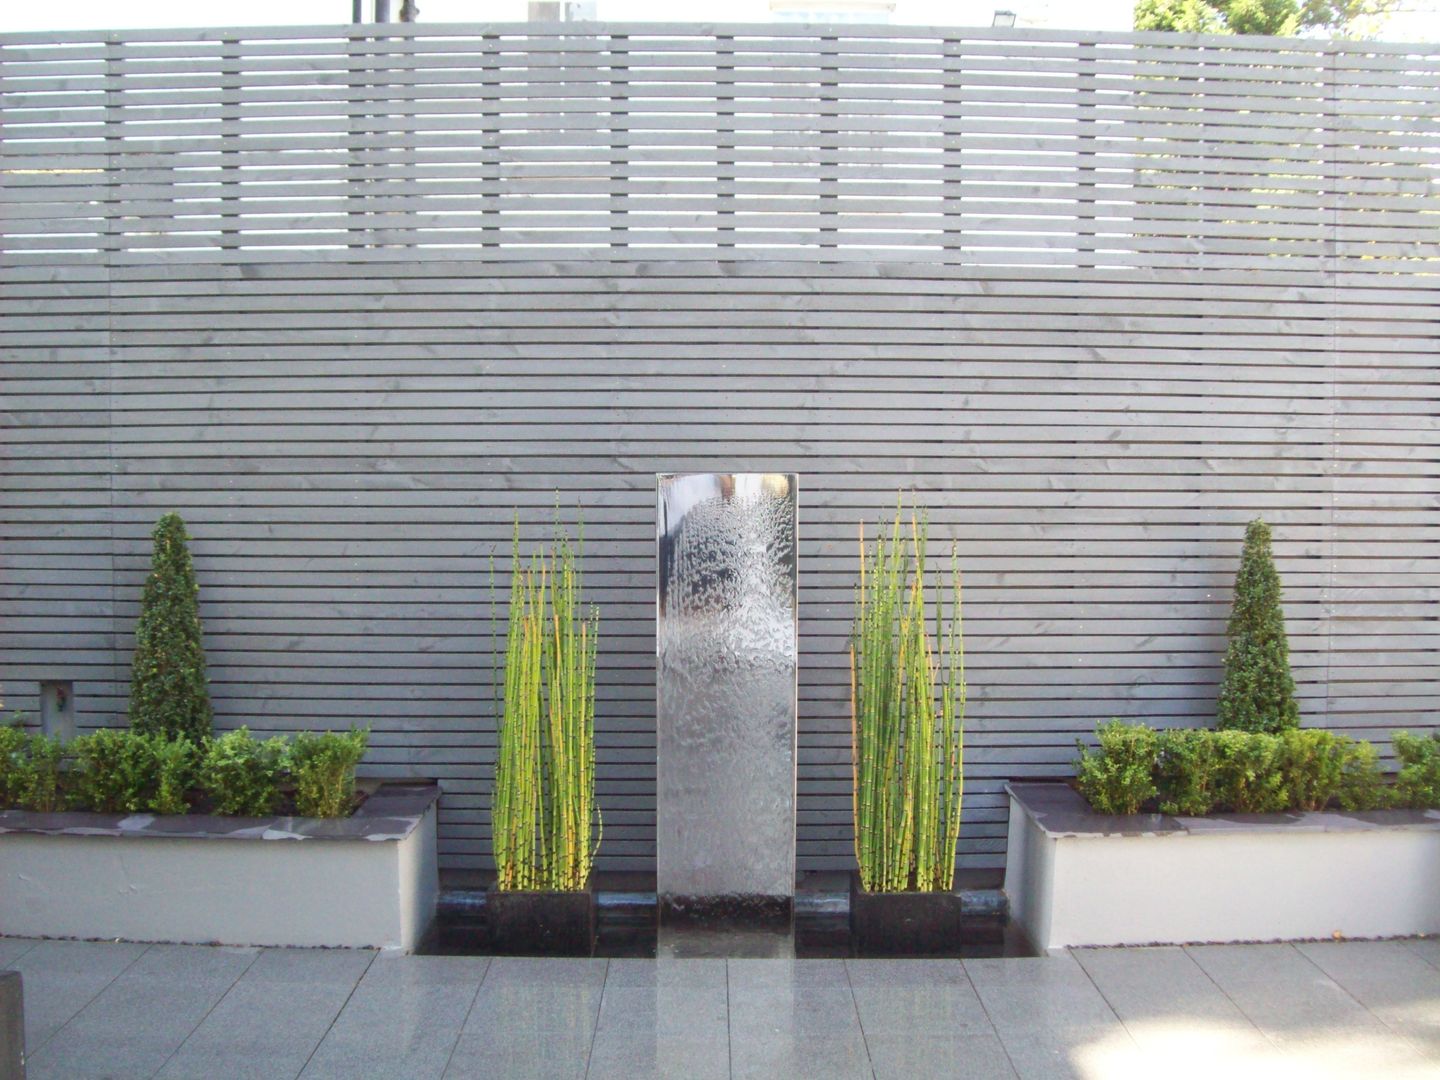 Stainless Steel Metal Water Feature Unique Landscapes Jardins modernos